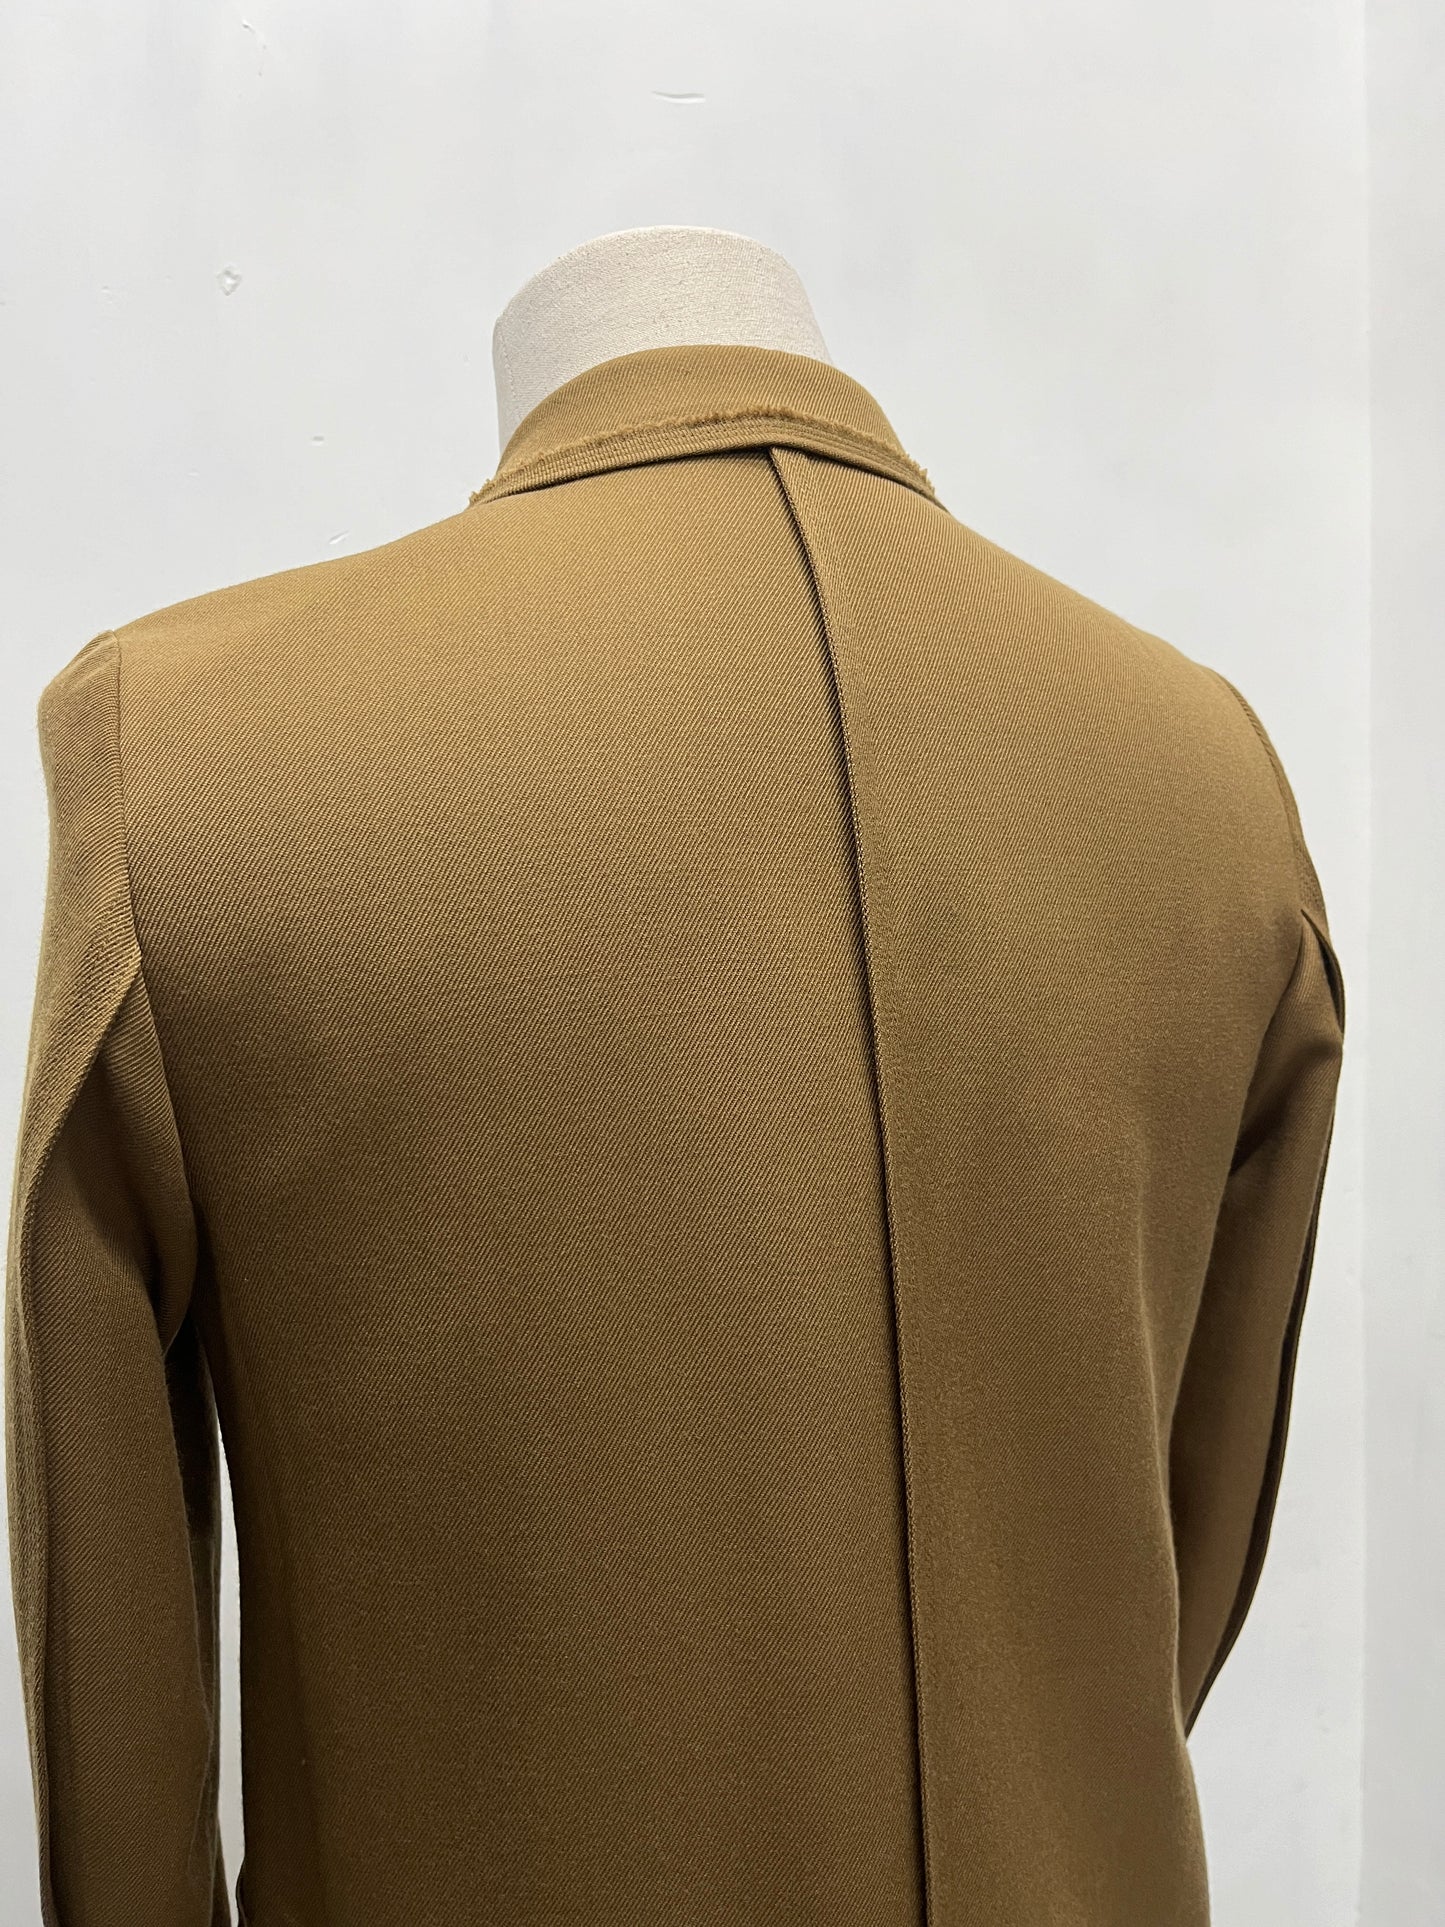 Undercover AW2015 Raw Edges Coat - Size 2